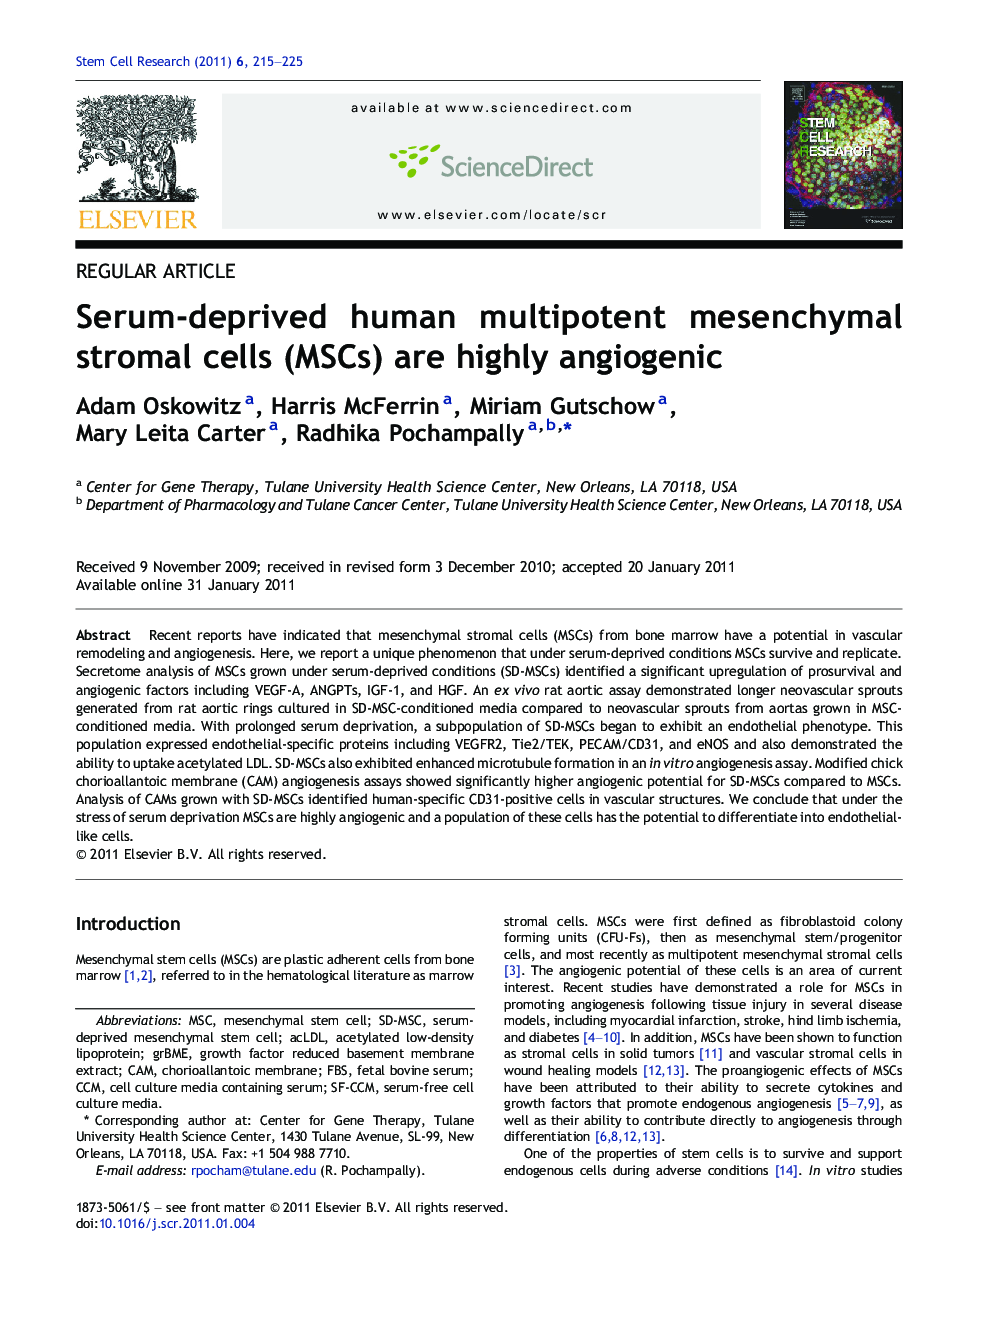 Serum-deprived human multipotent mesenchymal stromal cells (MSCs) are highly angiogenic